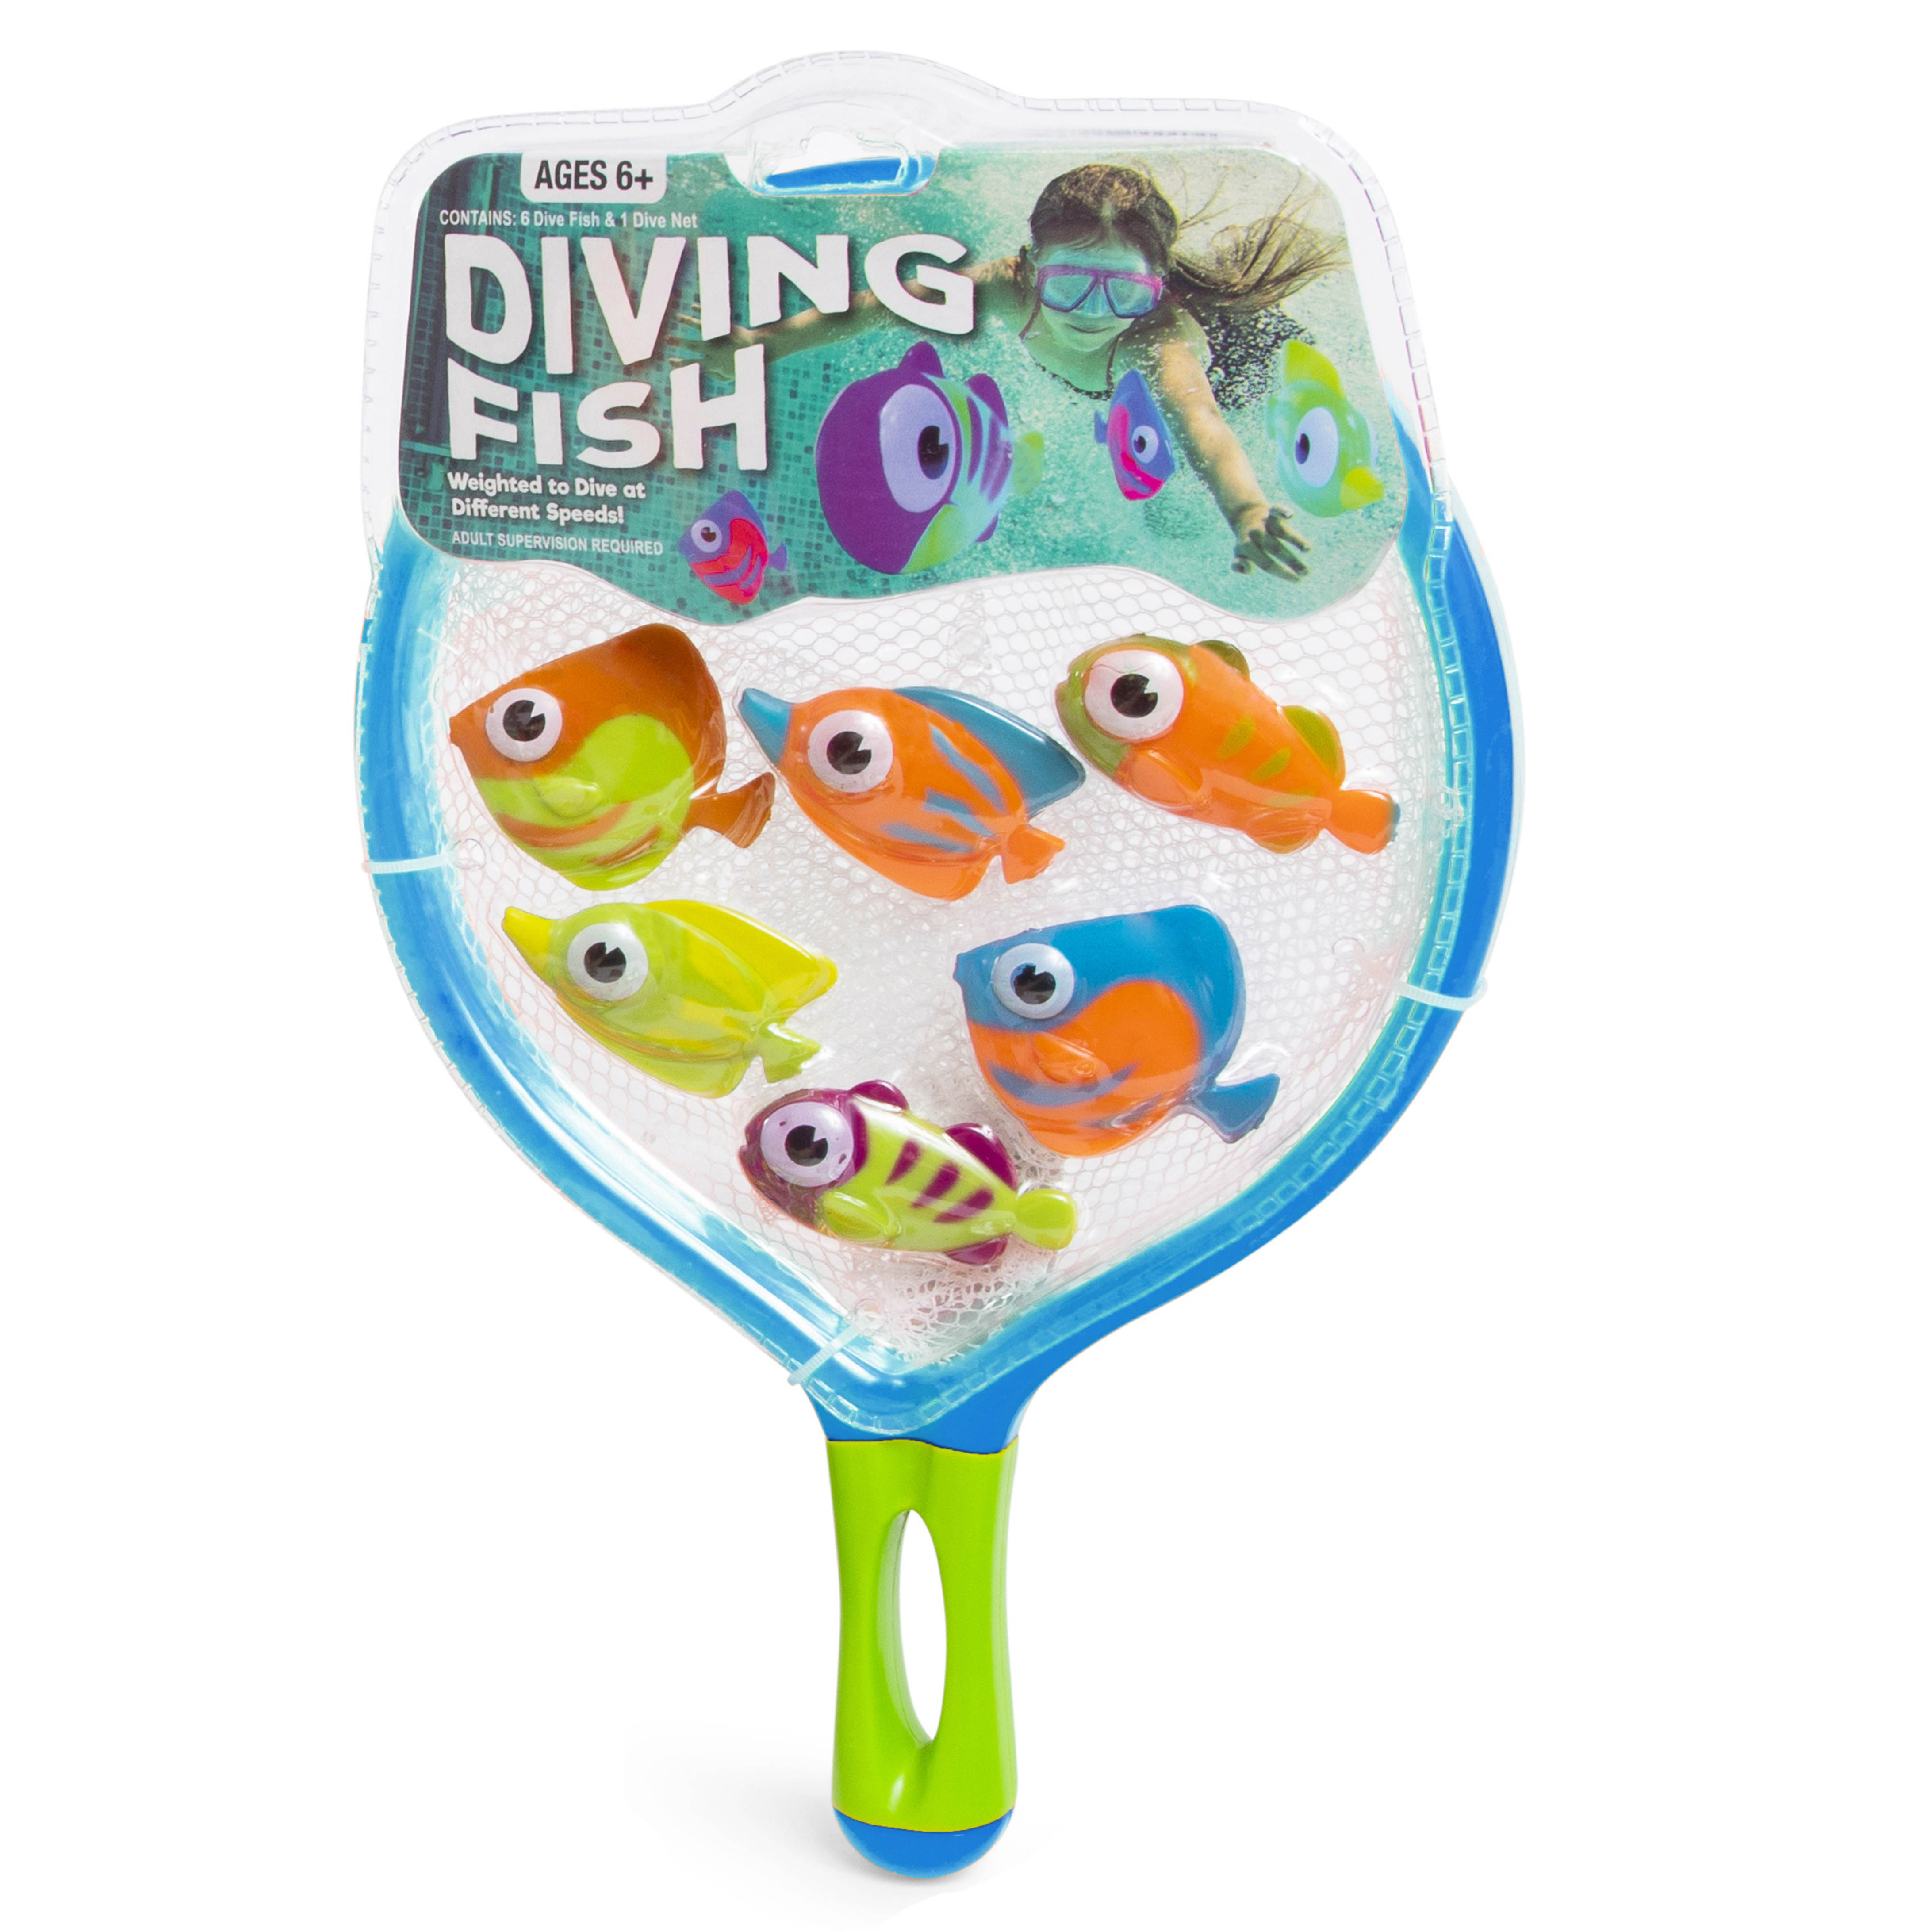 Five Below Pool game, summer, water, water toy, kid pool, float, vacation,  vacation toys, swimming, swim game;diving game;pool game for kids;kids game; beach toy;pool toy;diving fish;fishing net;cheap toys kids;fishing fishing  toy;fishing toy